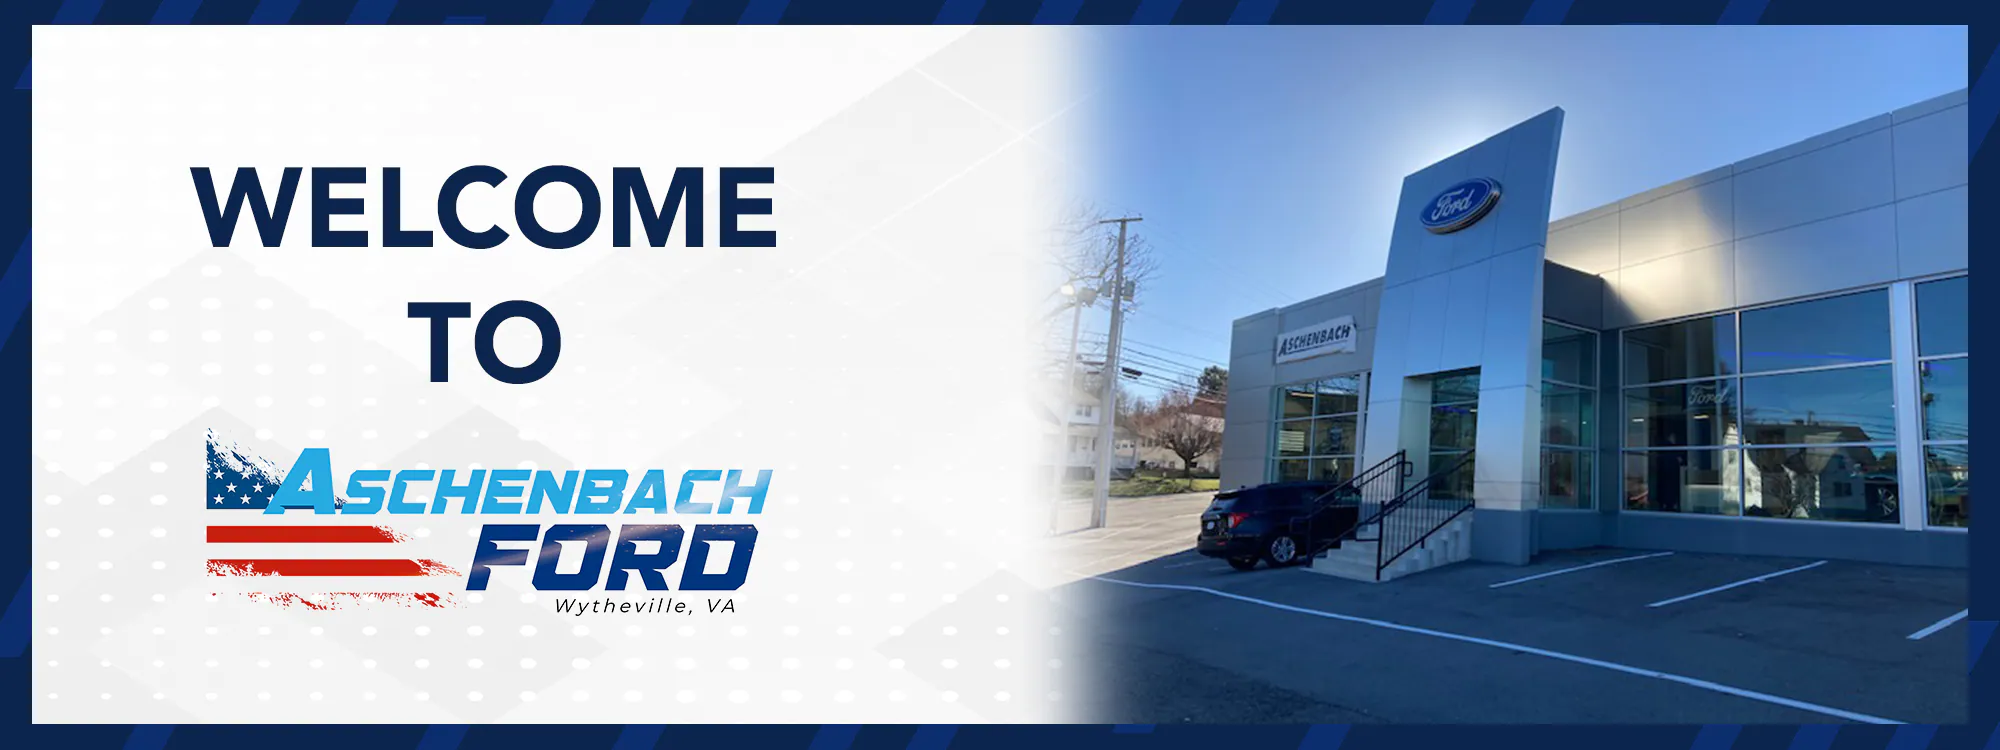 About Us | Aschenbach Ford in Wytheville AL